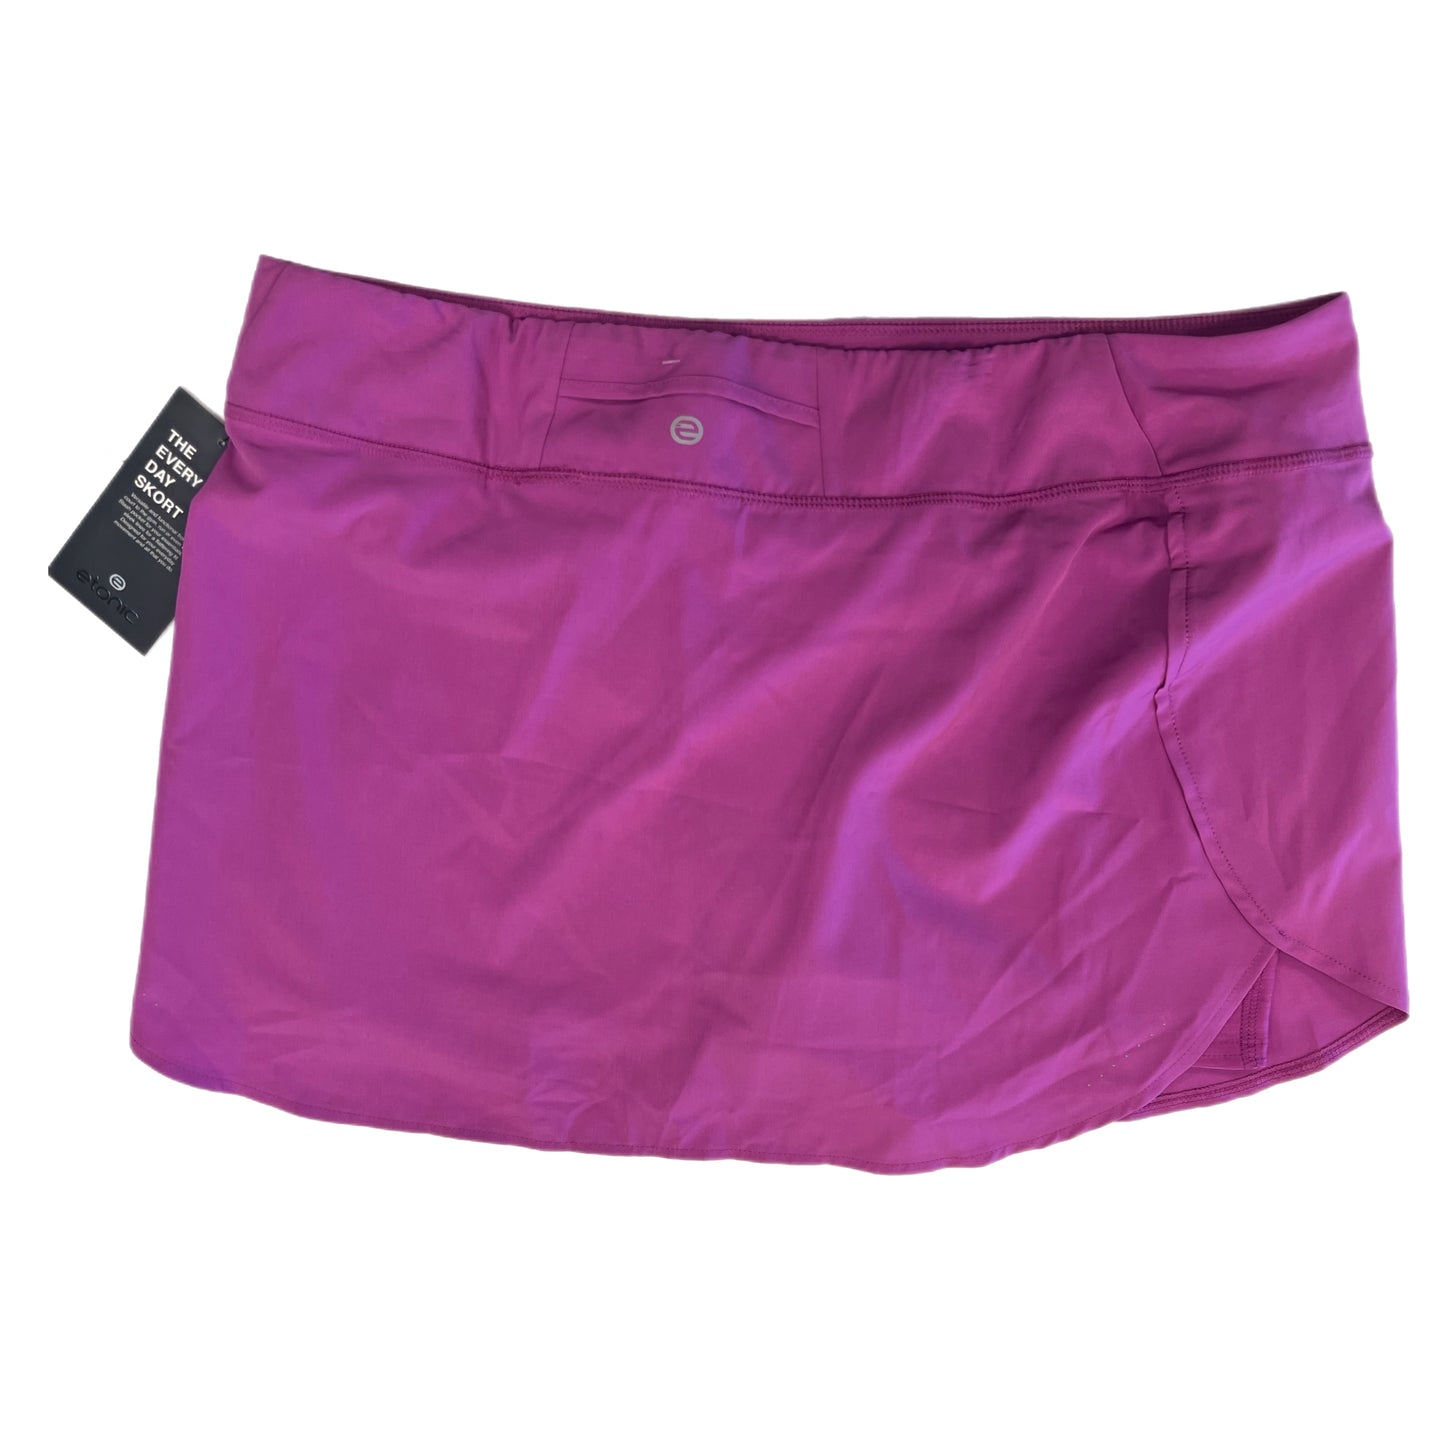 Athletic Skirt Skort By Clothes Mentor  Size: Xl